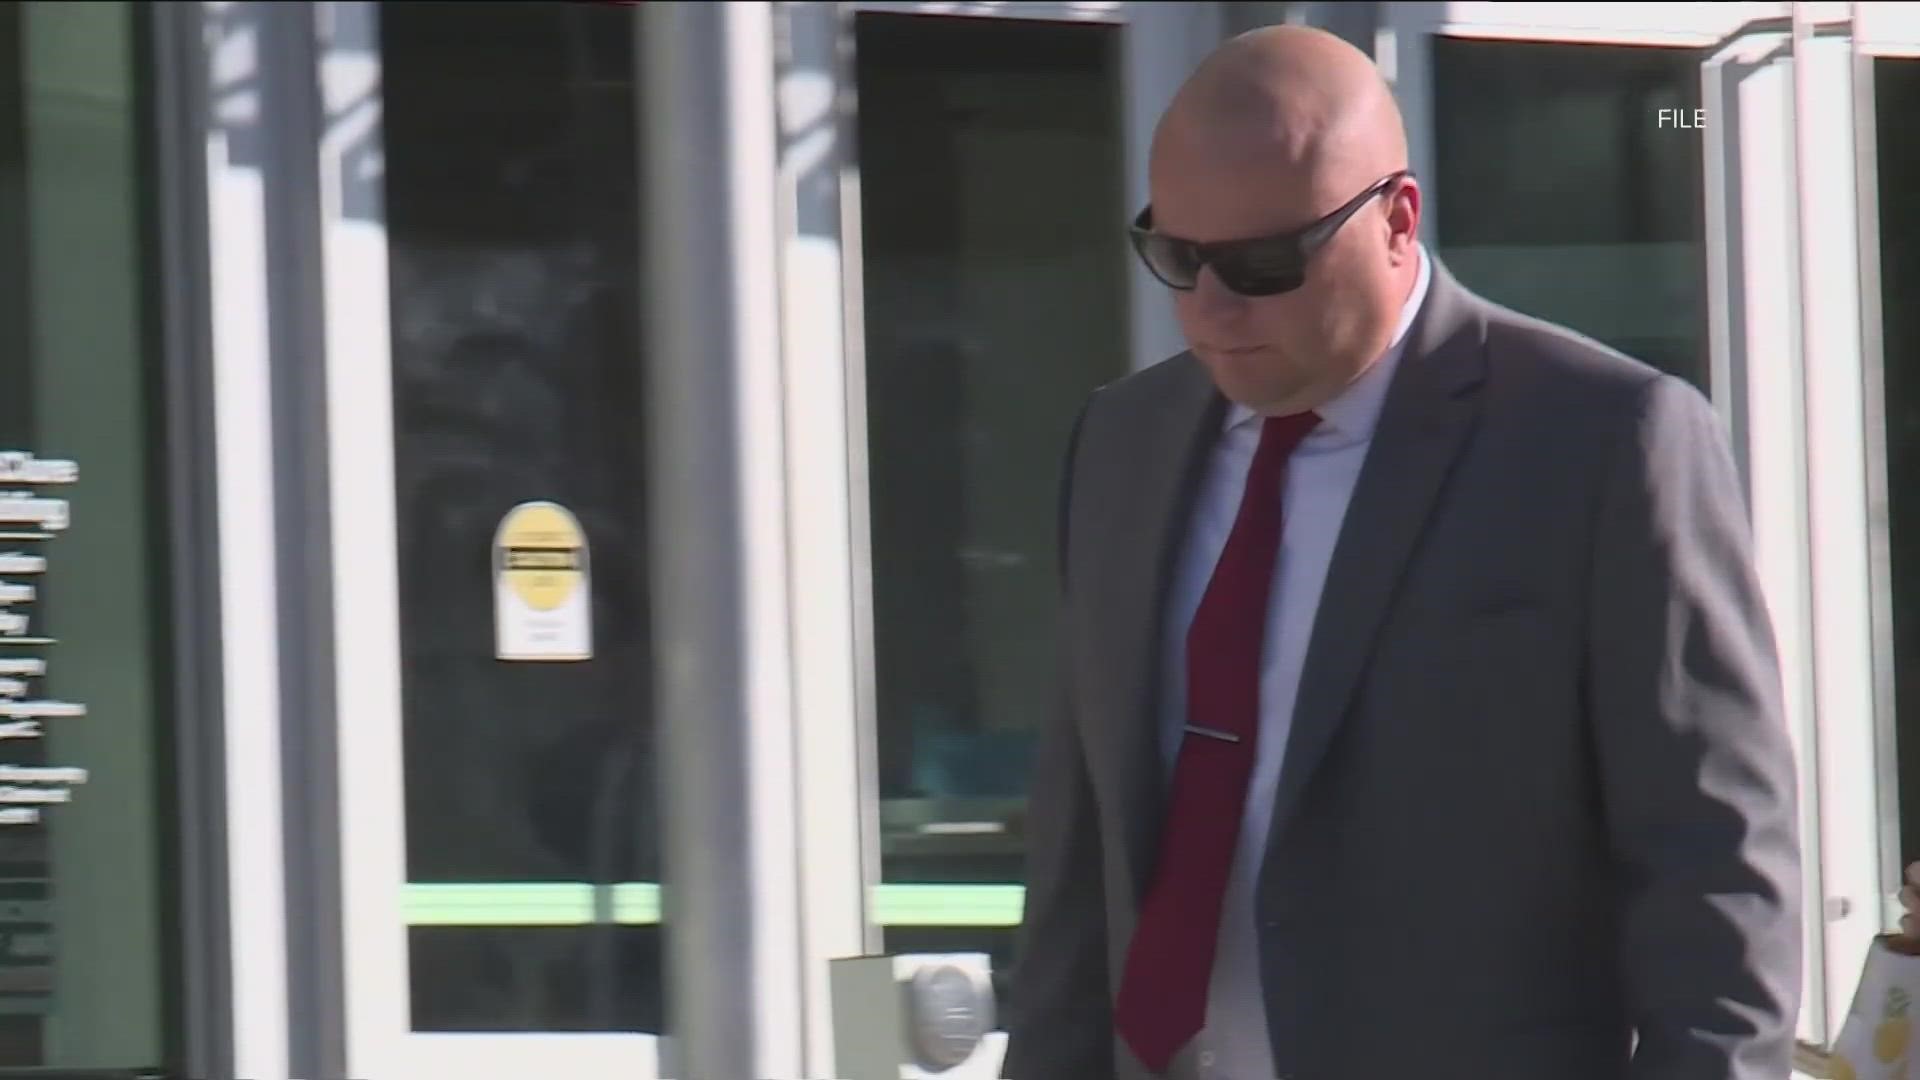 Former Caldwell police officer, Joseph Hoadley, who was sentenced to federal prison in February, has filed to appeal the judgement.